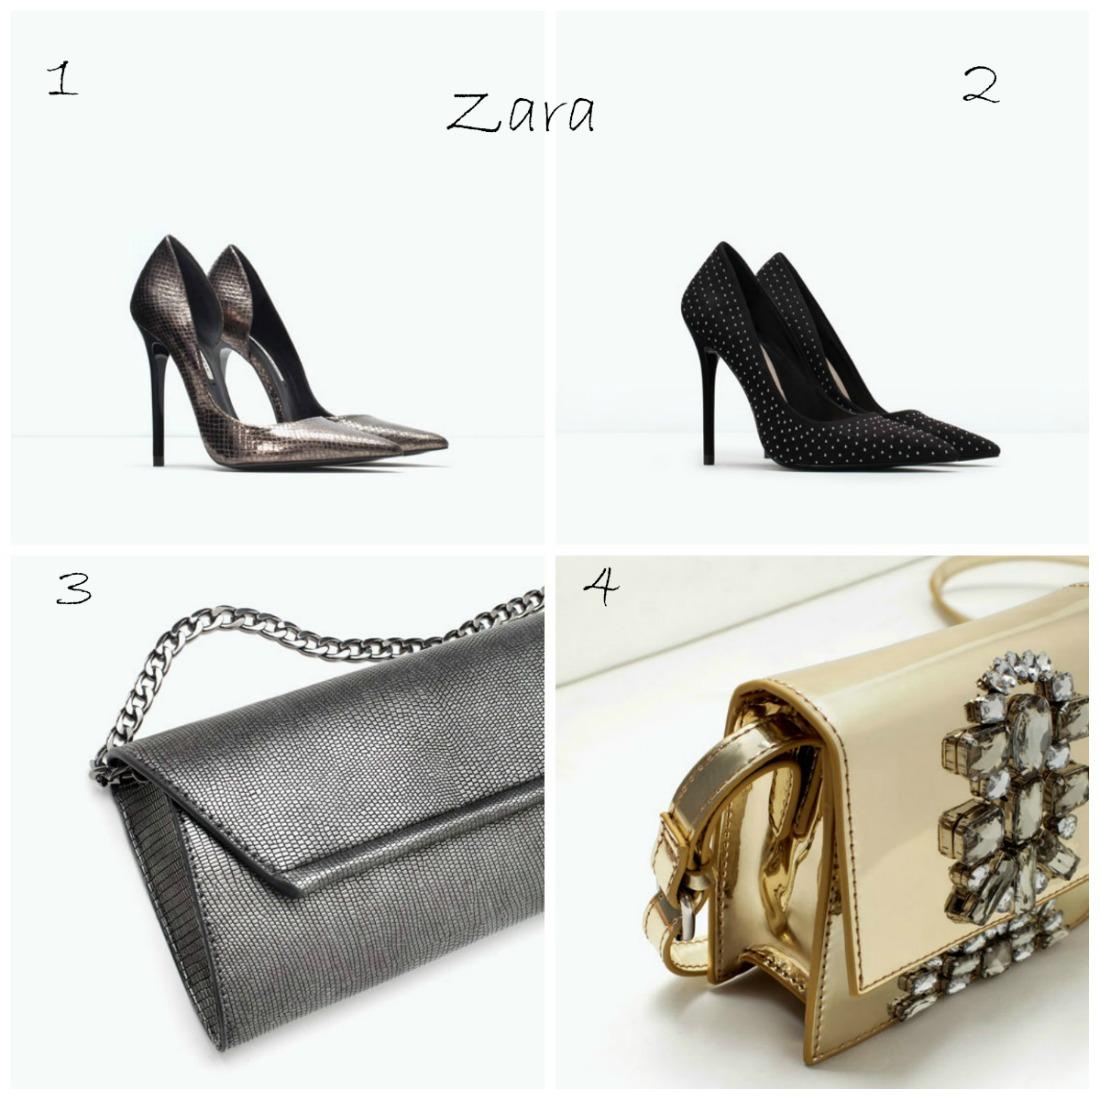 Shoes and bags